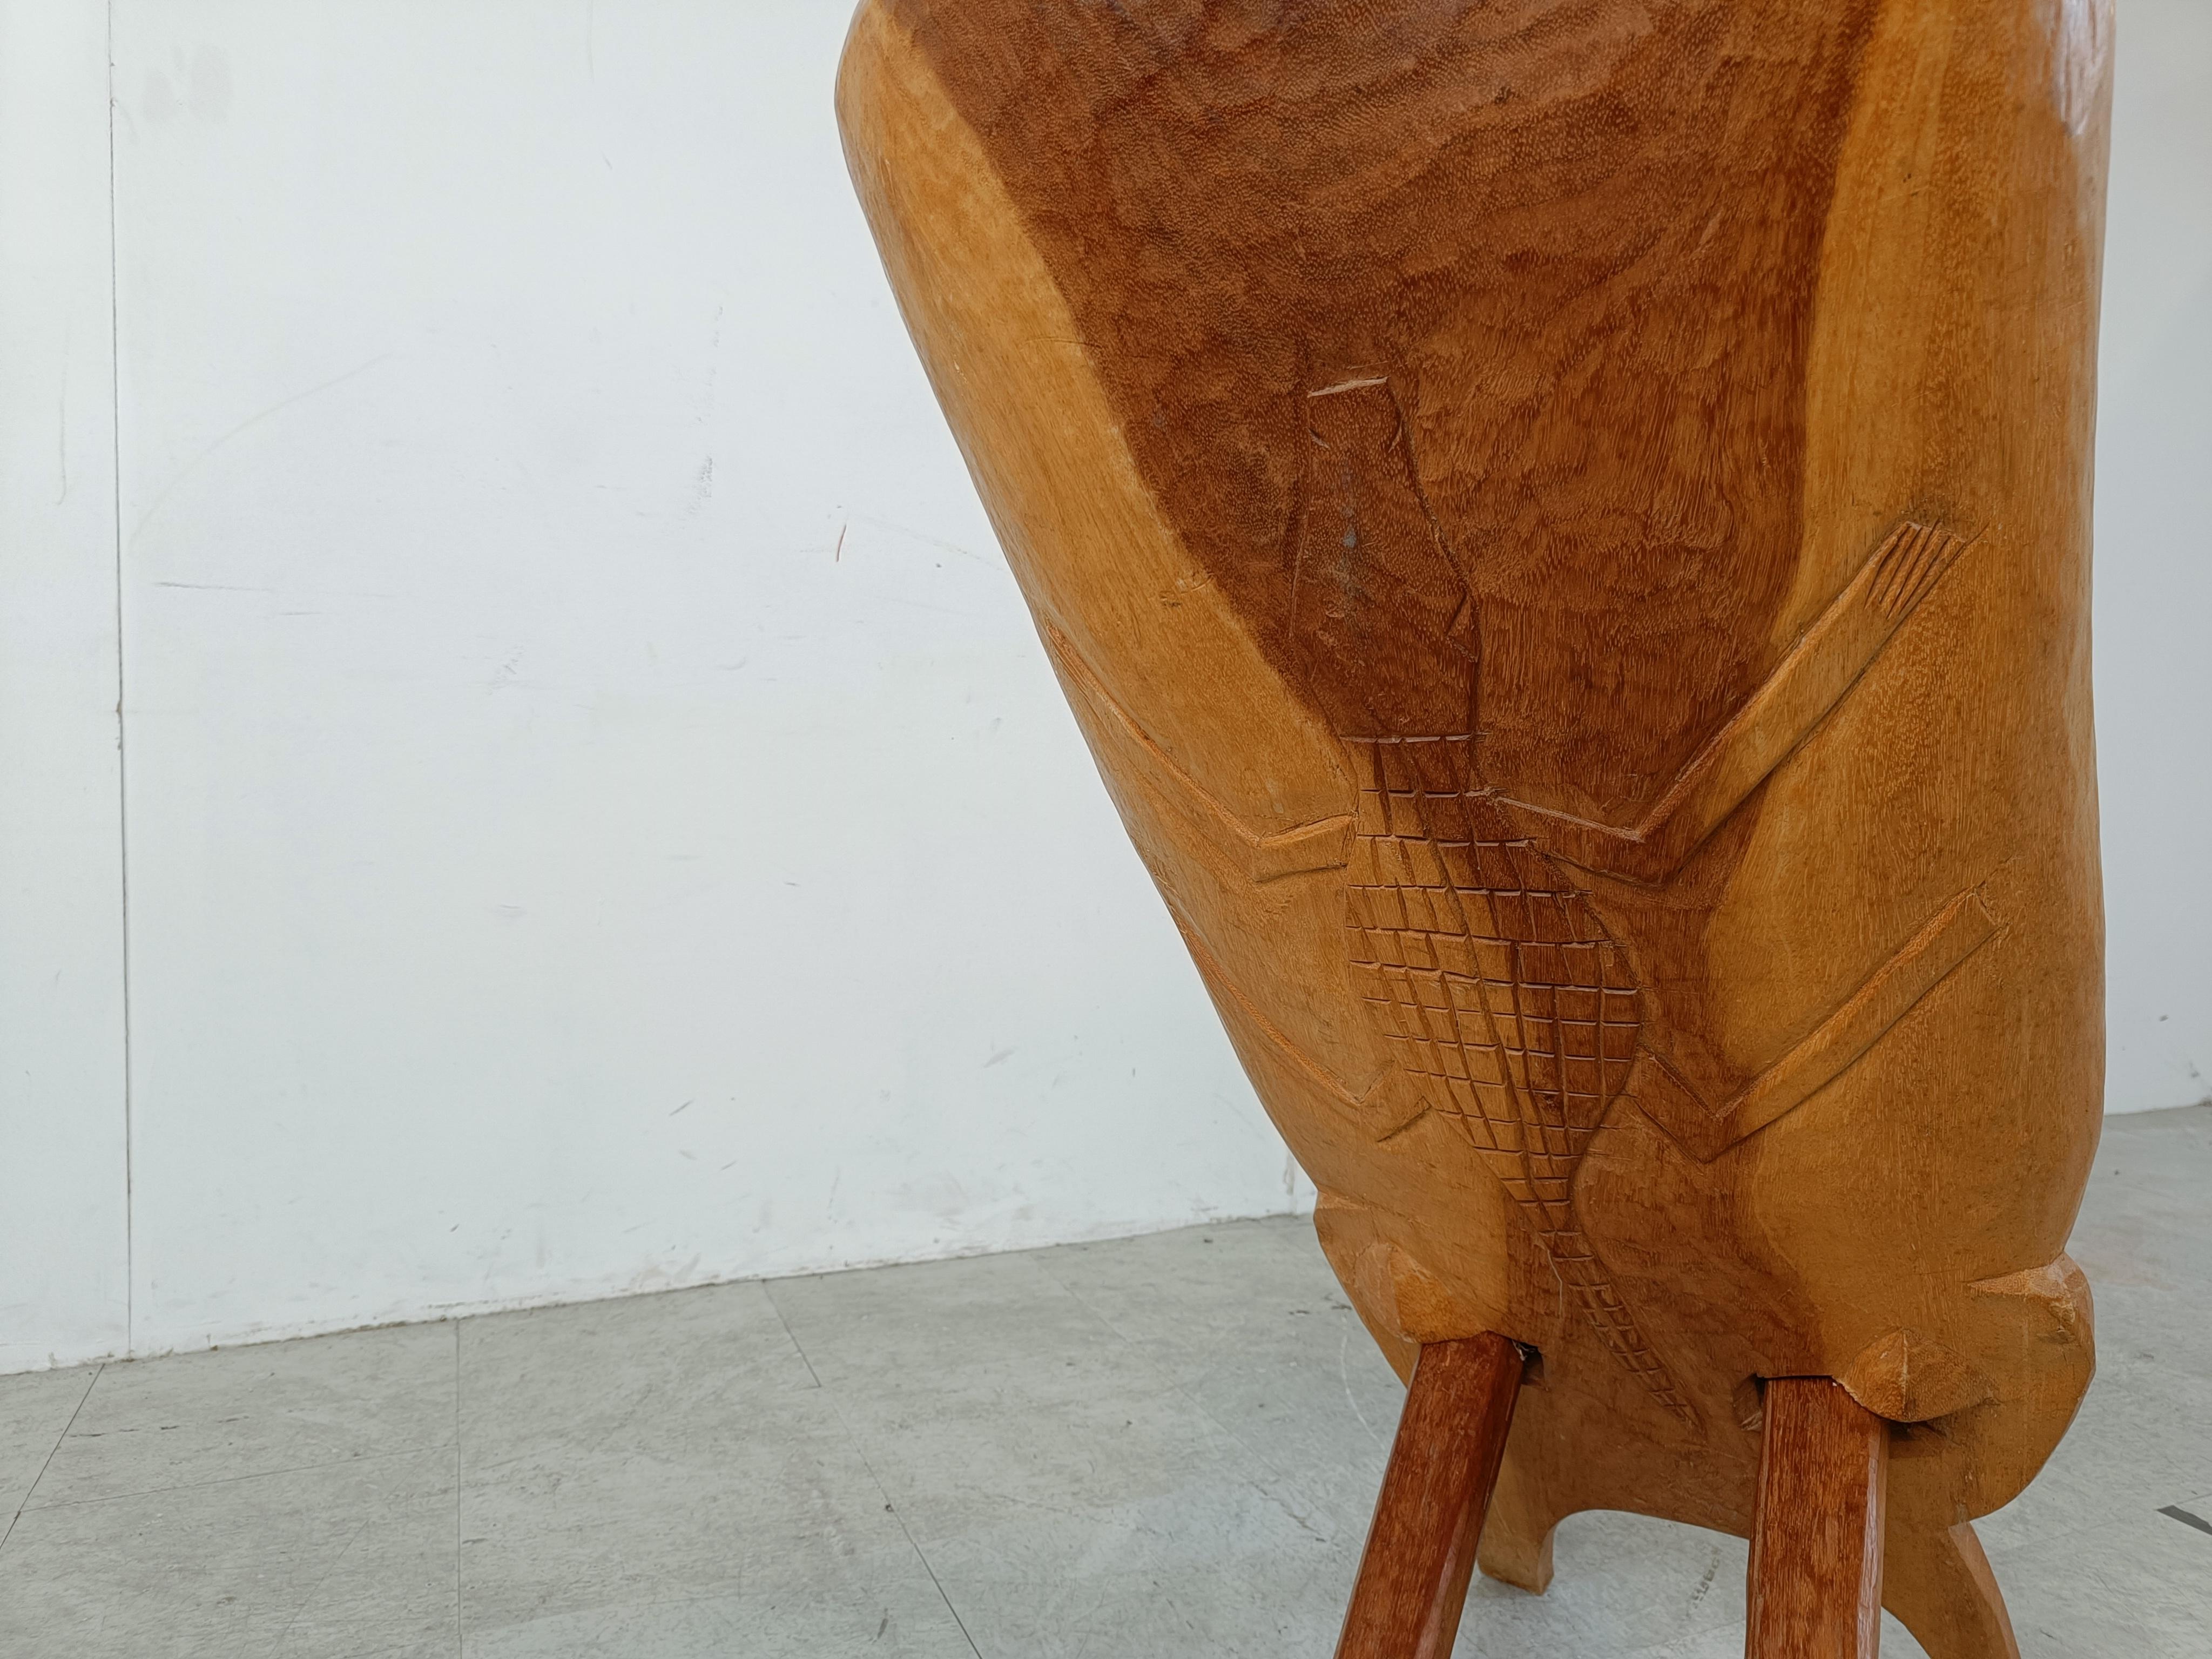 Traditional African birthing chairs consisting of two interlocking wooden planks carefully carved out.

Beautiful natural wooden vains.

Good condition.

1960s - Africa

Dimensions:
Height: 90cm/35.43